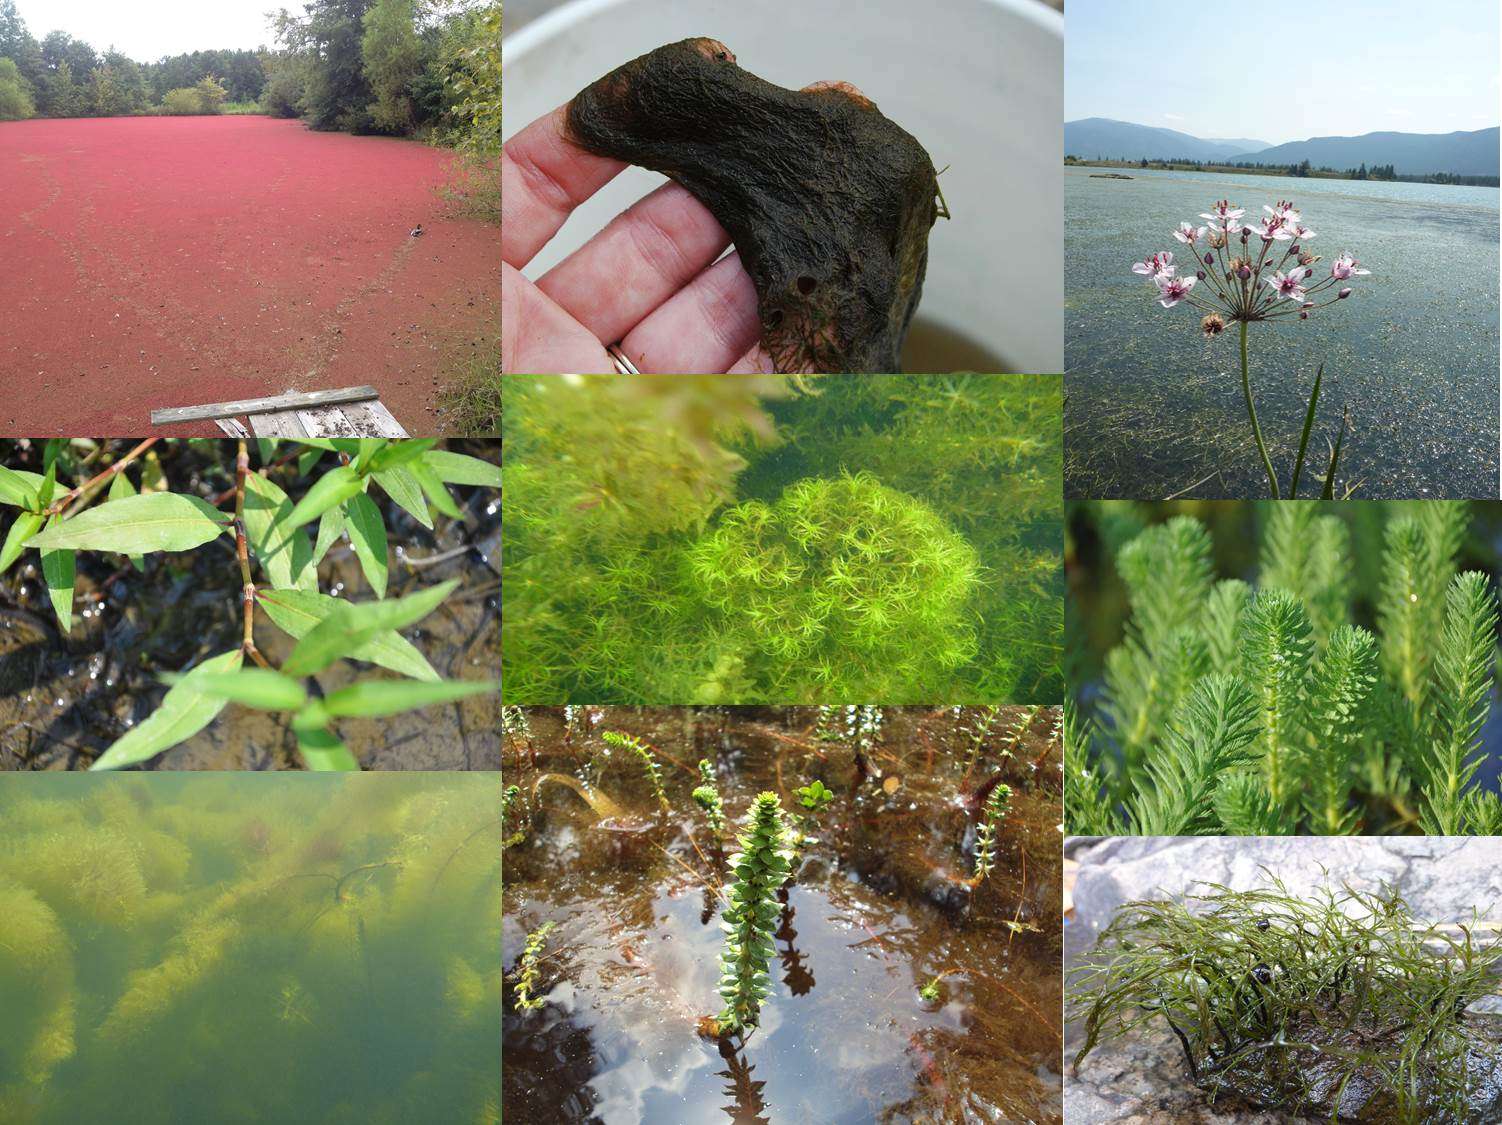 These are some of the most common aquatic plants you might come across on the water this year. They are but a select few of the aquatic plants you might find growing in our nationâs waters.